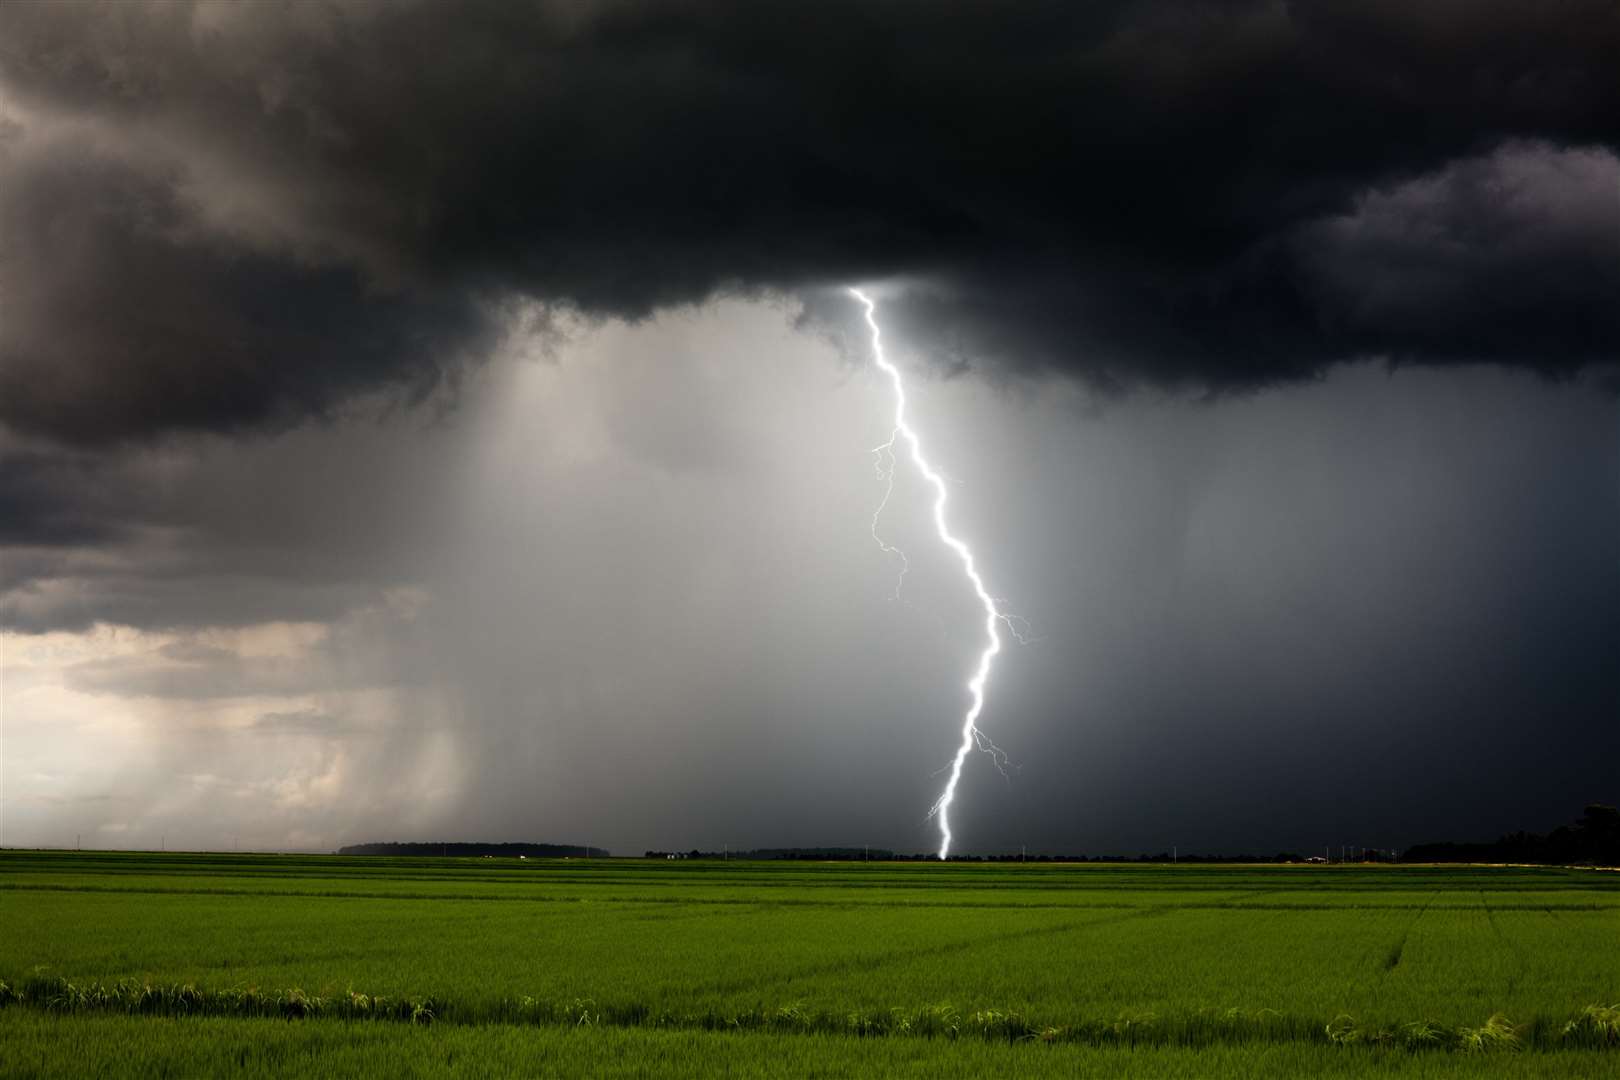 The Met Office is forecasting more thunderstorms tomorrow